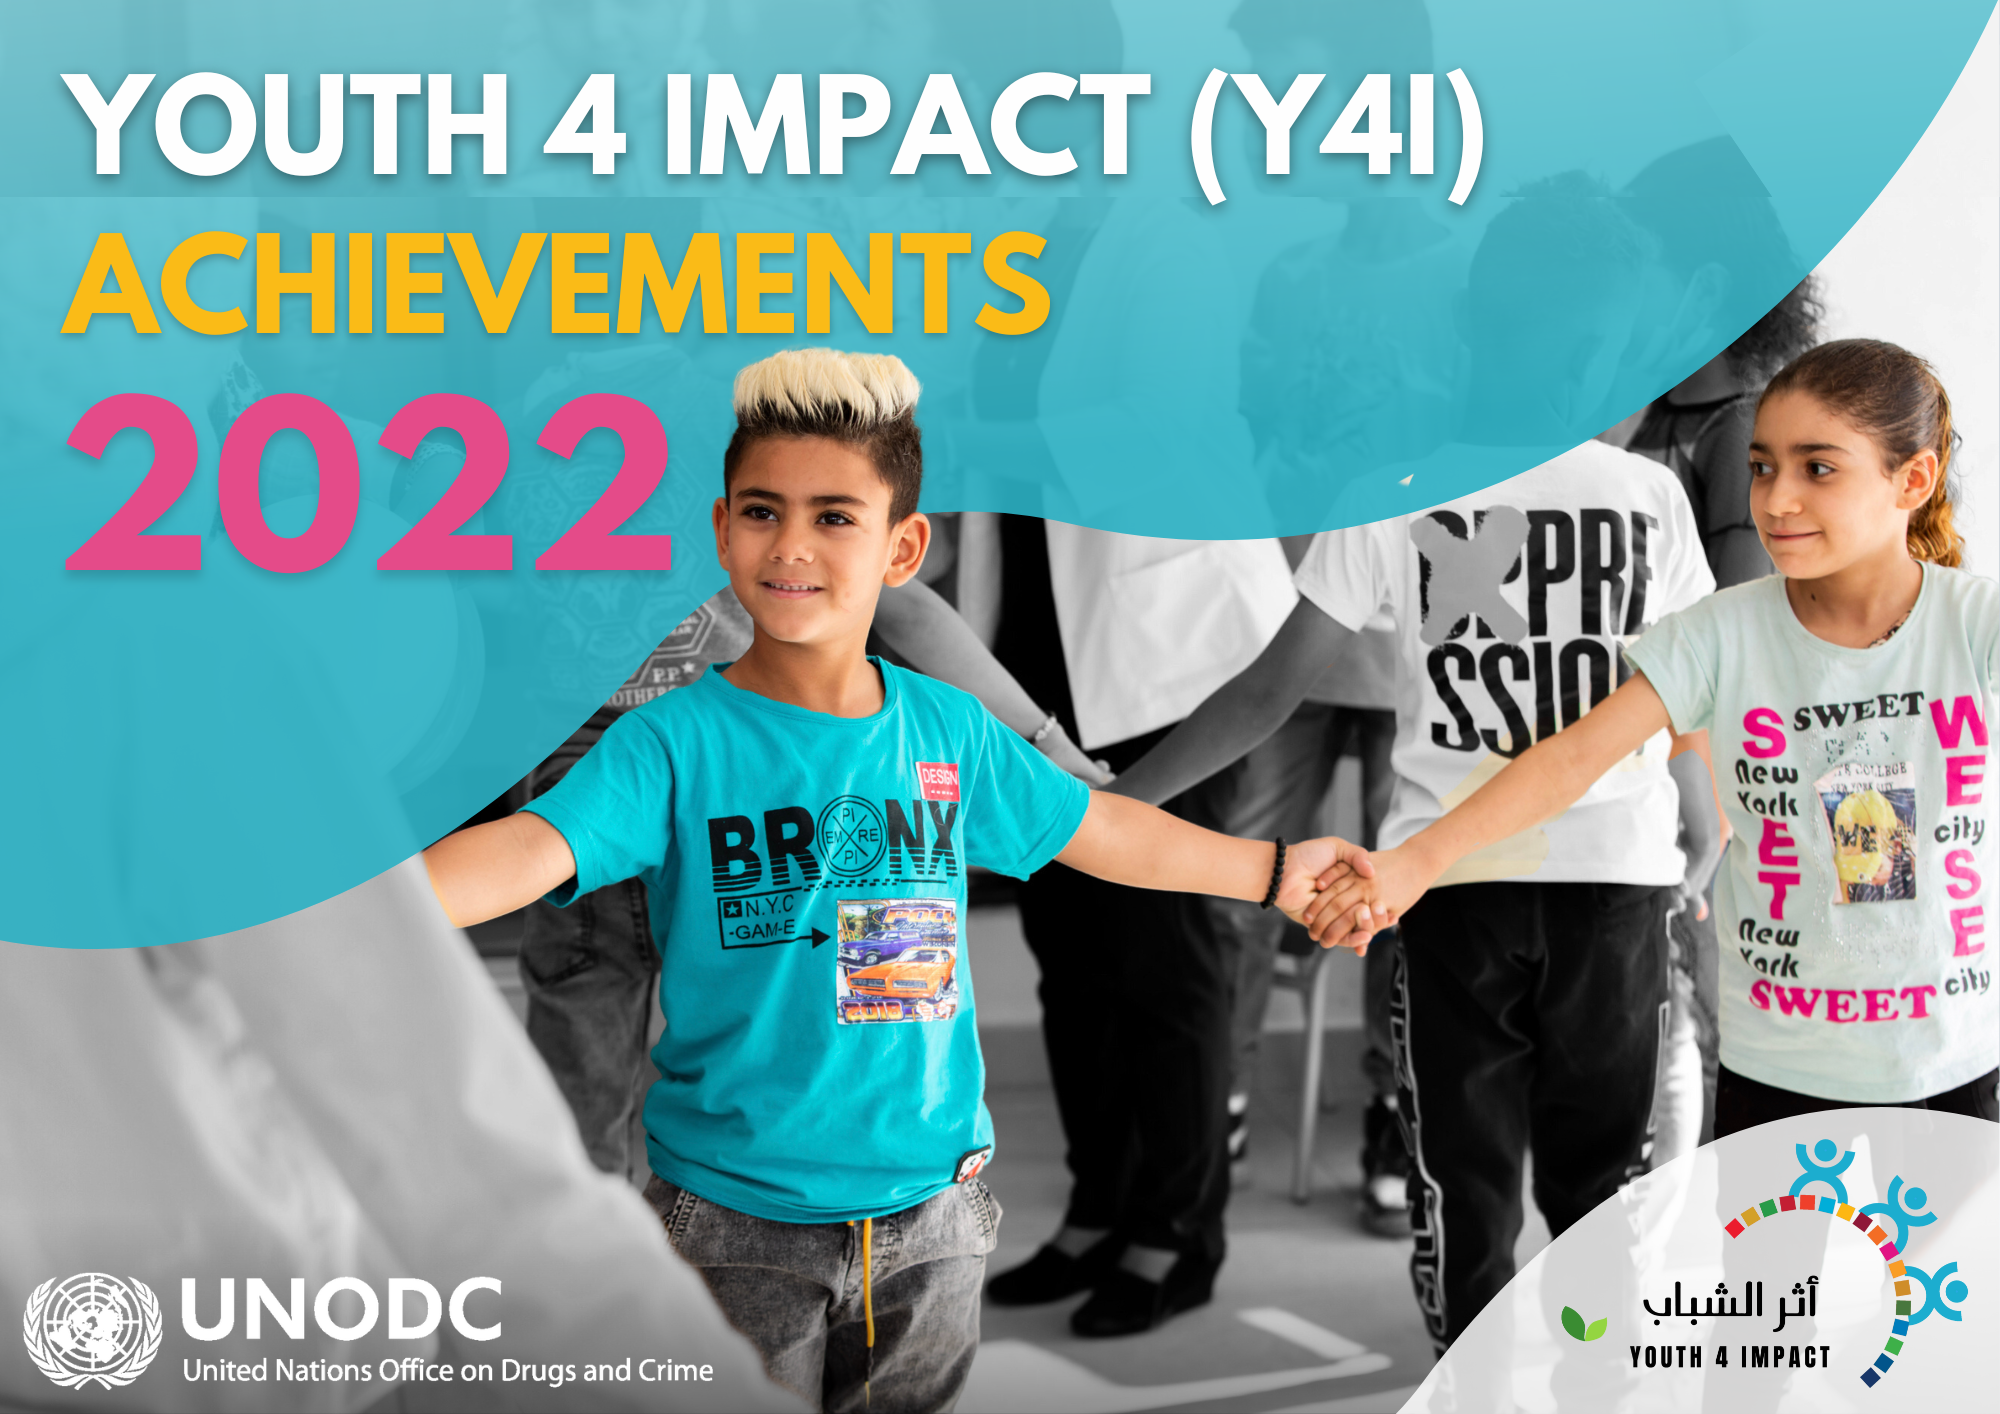 Youth 4 Impact Programme Achievements Report 2022